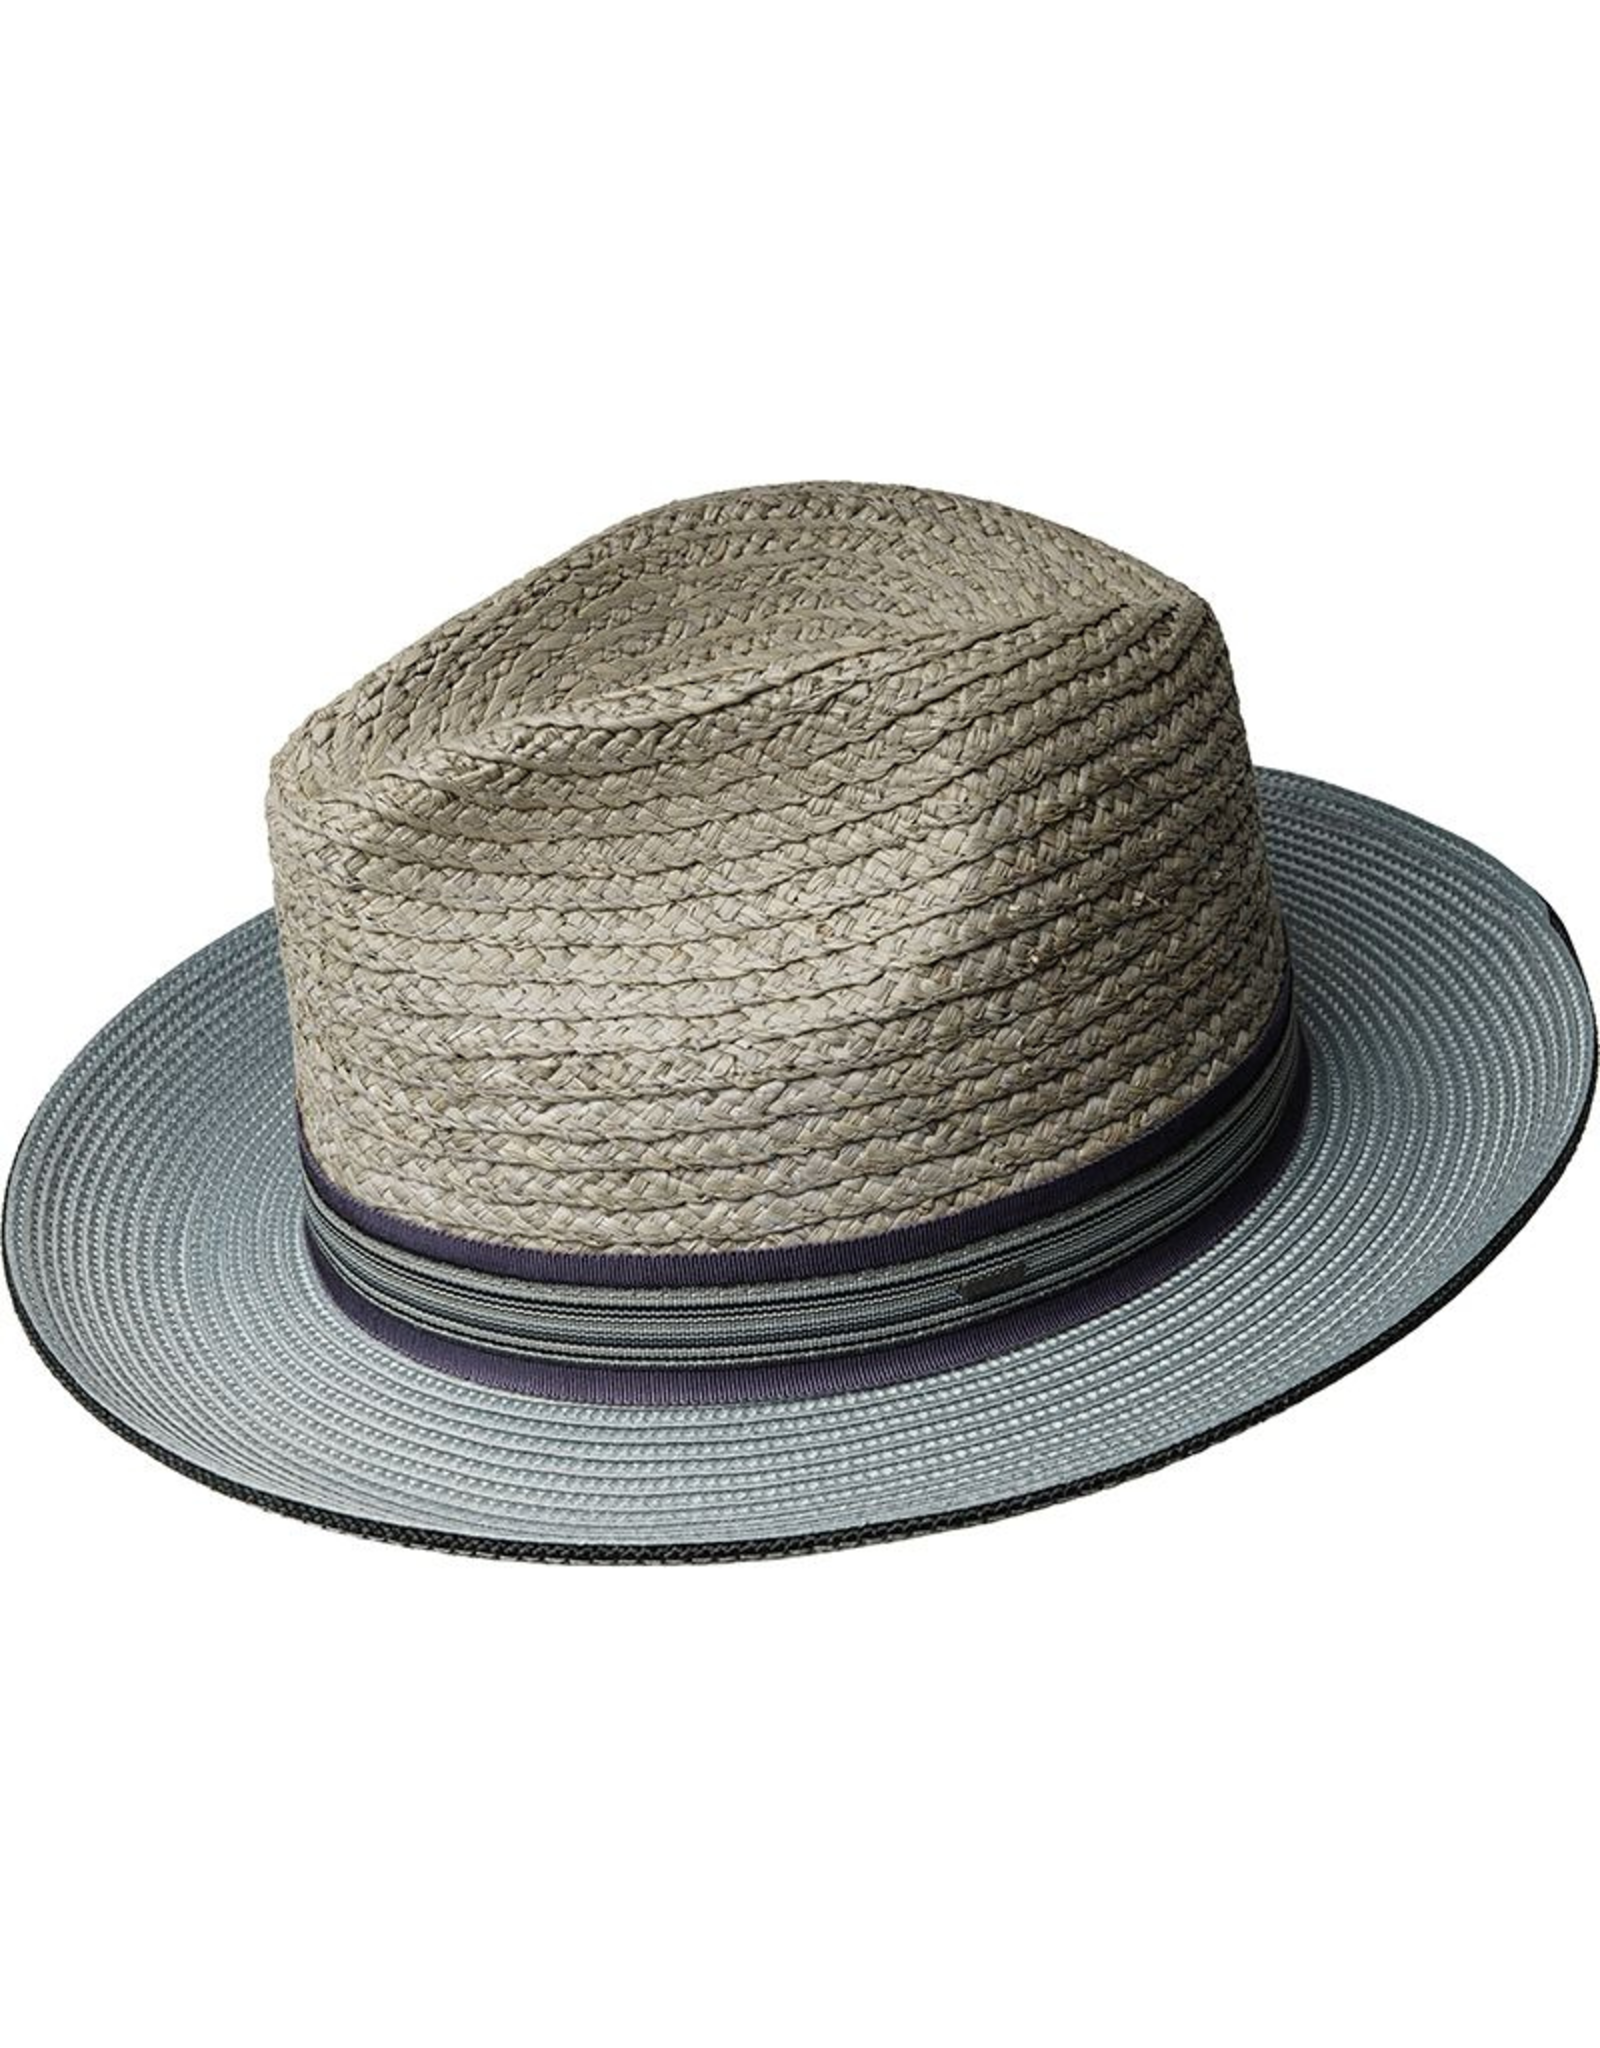 Bailey 1922 HAT-FEDORA "SCORSBY" 2 TONE BAND